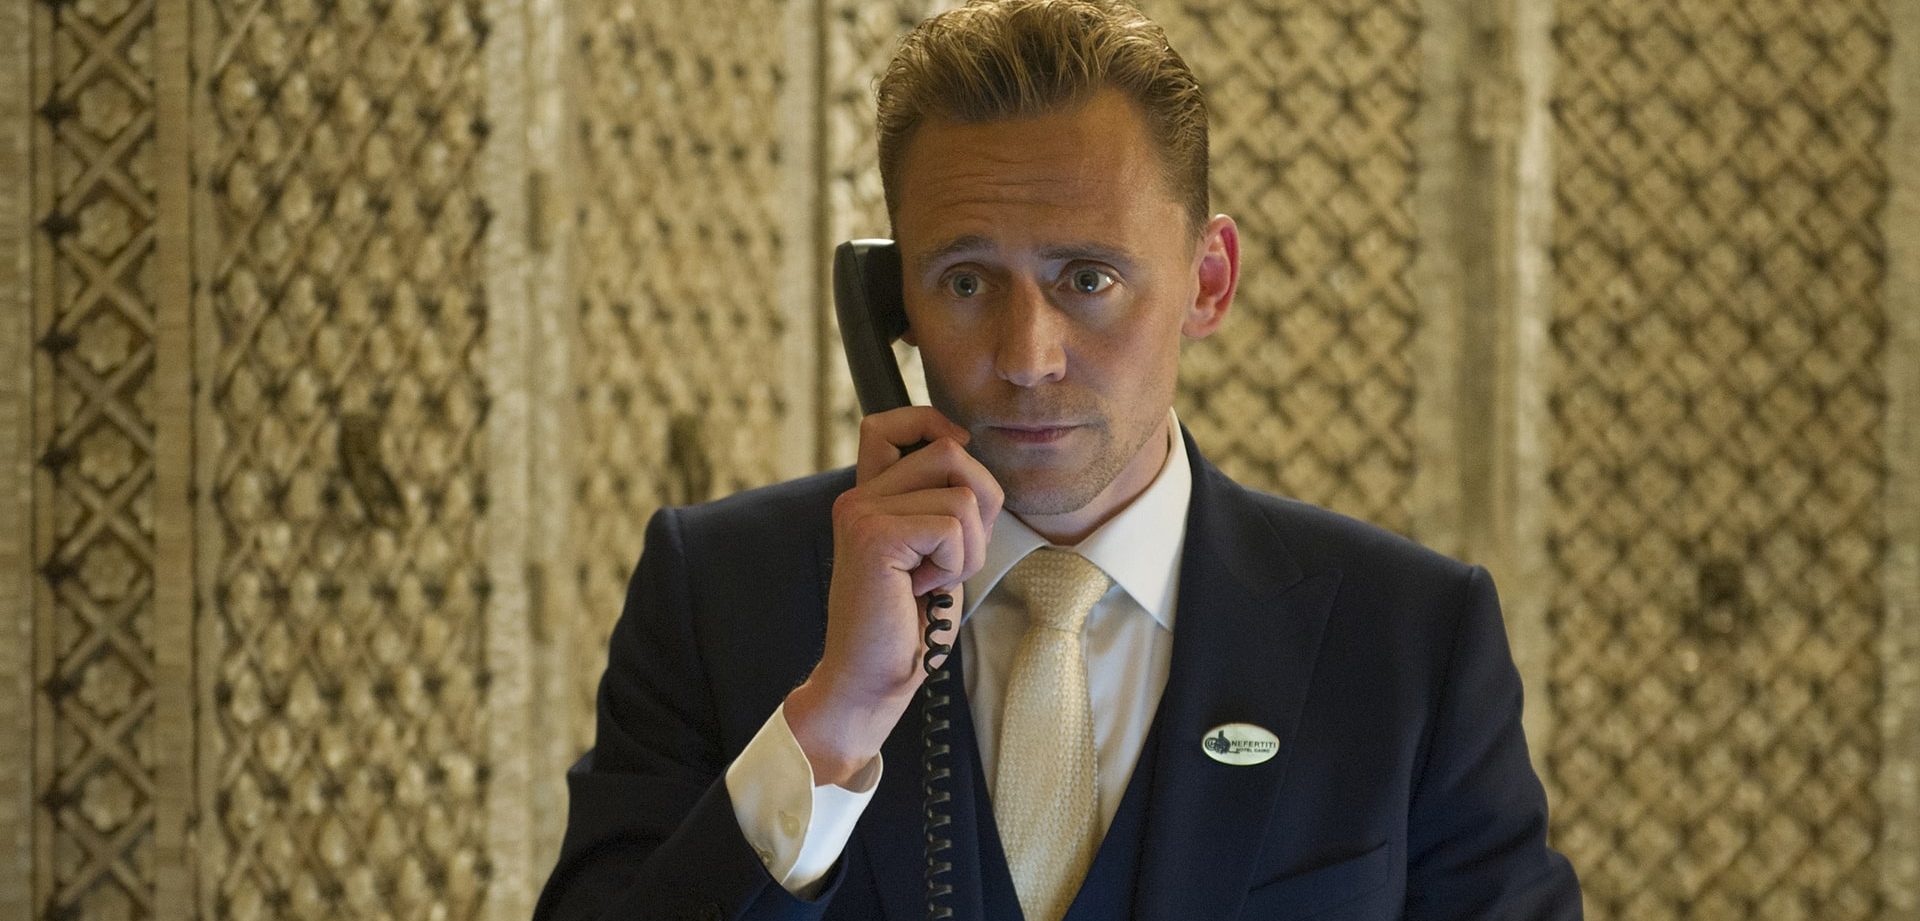 The Night Manager Season 2 Starts Filming in London and South America in June